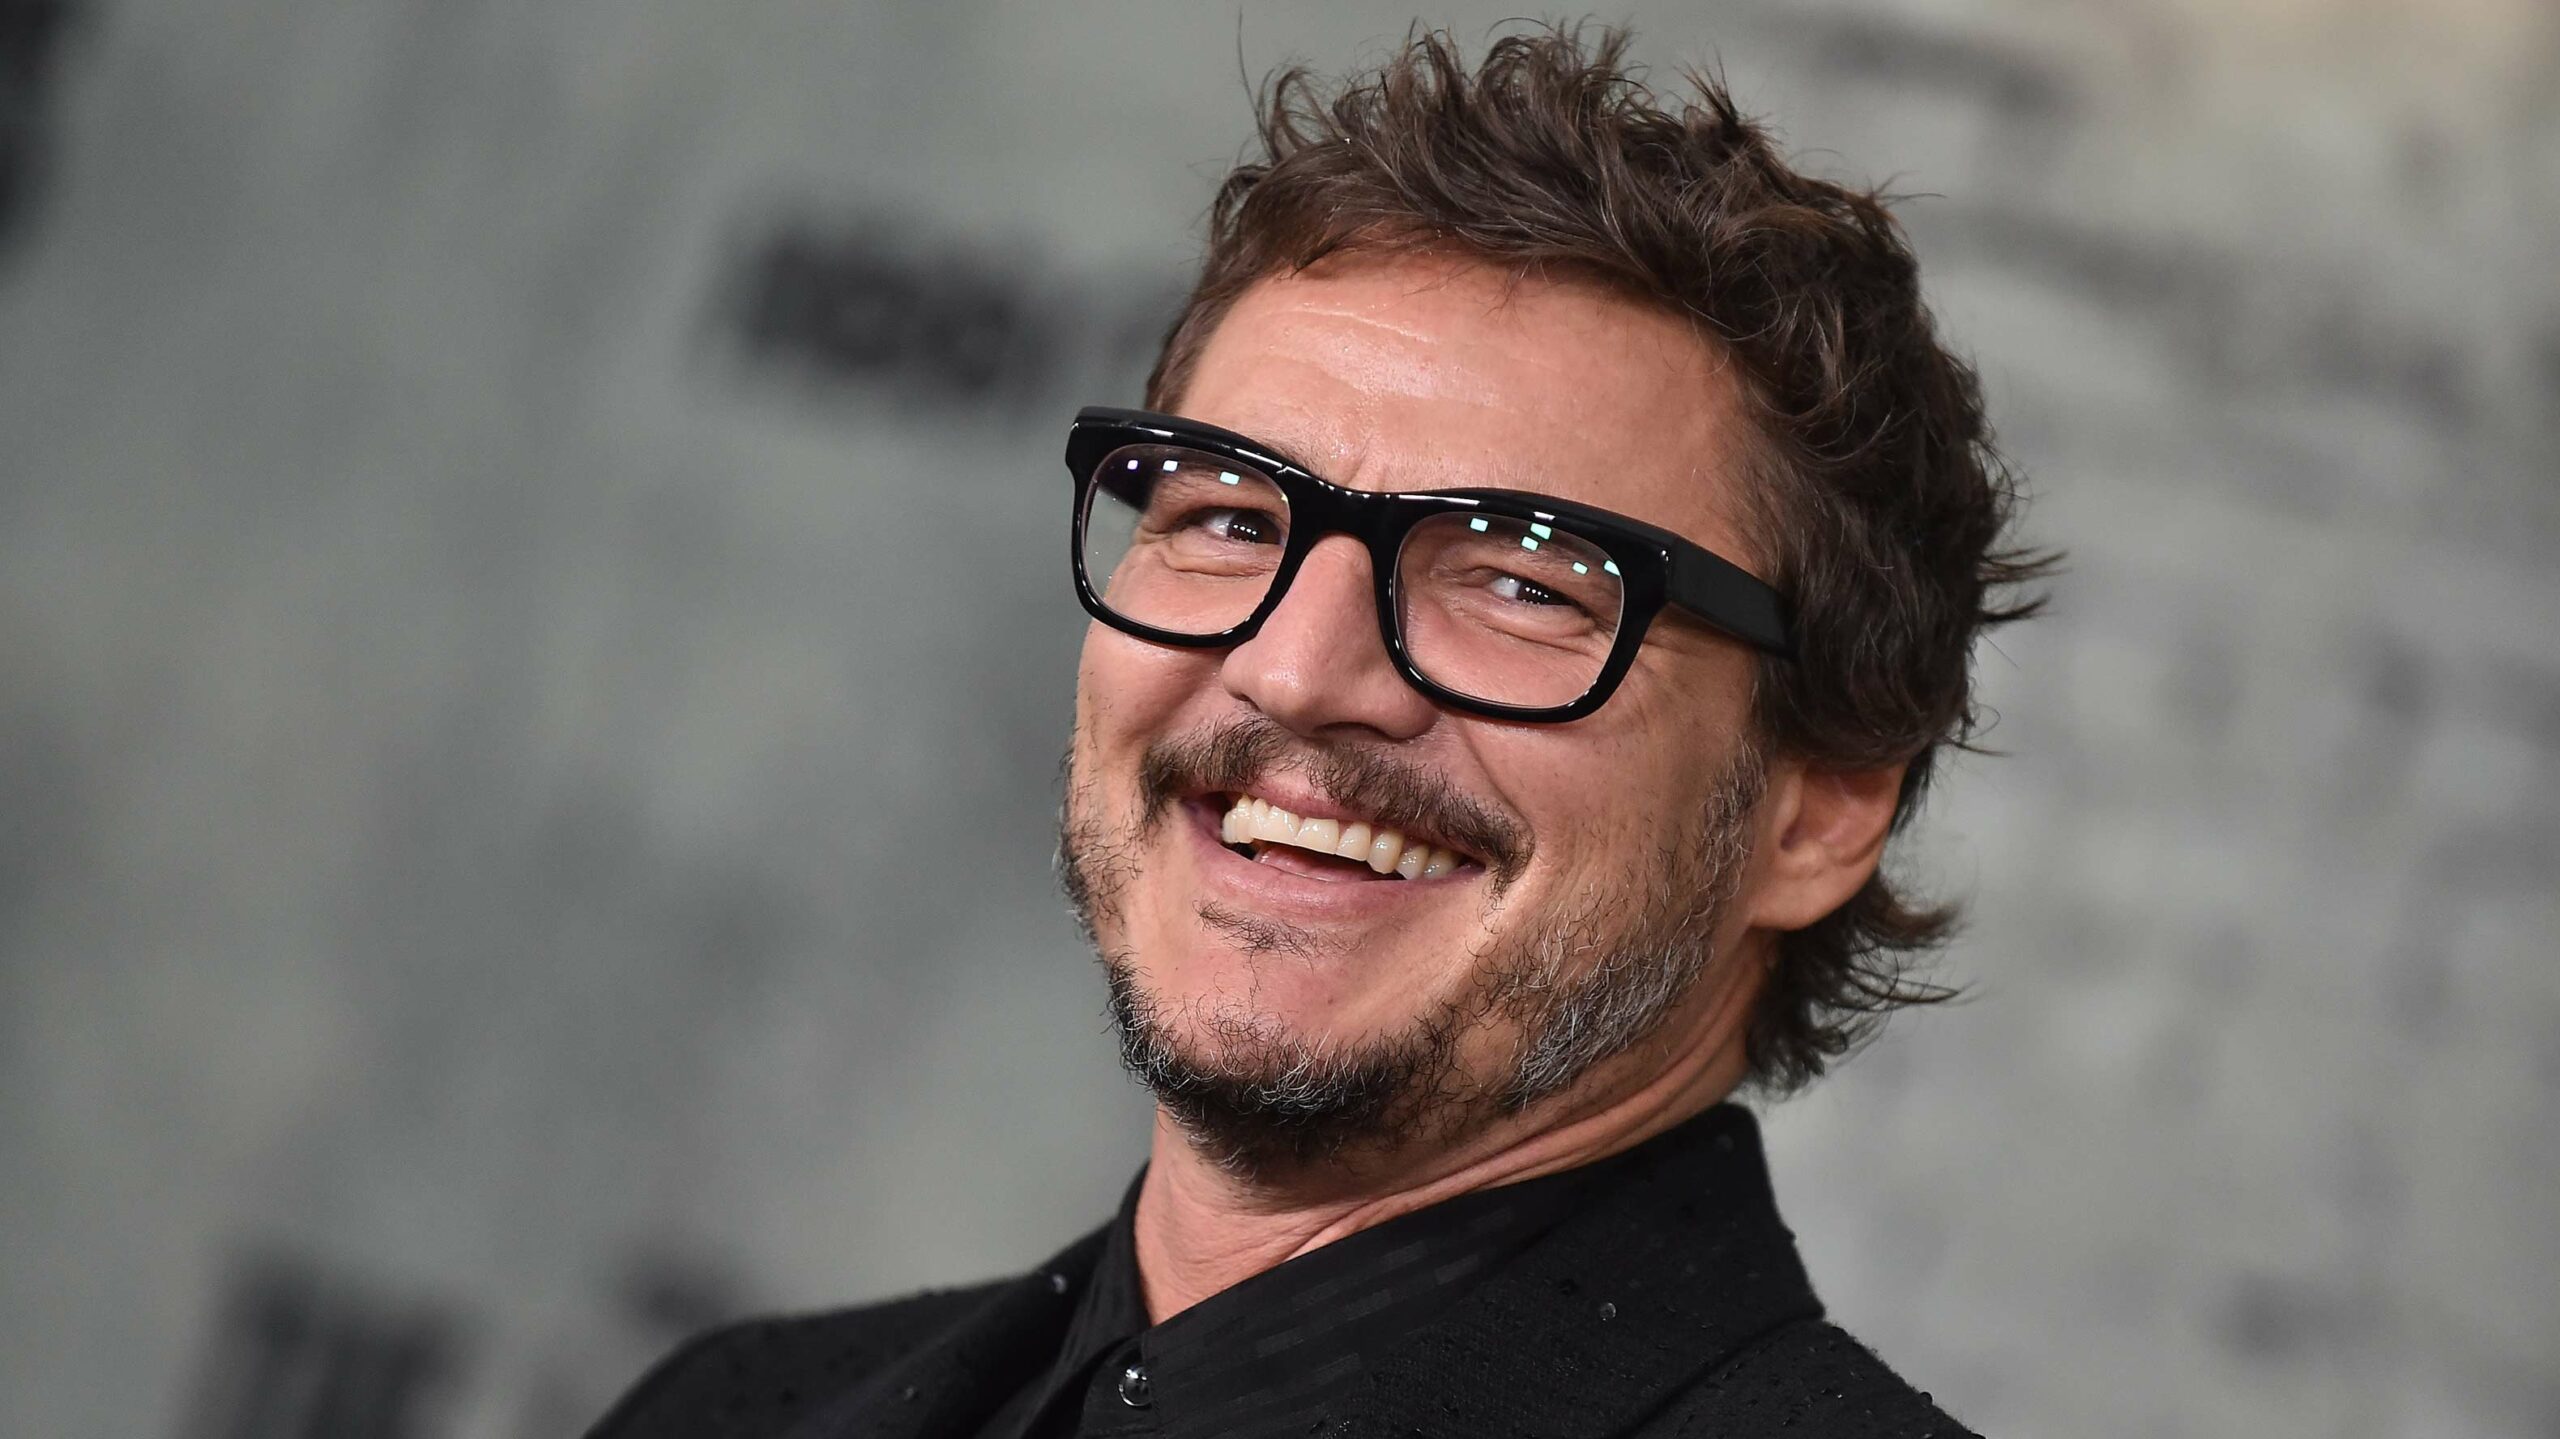 Pedro Pascal The Last of Us premiere